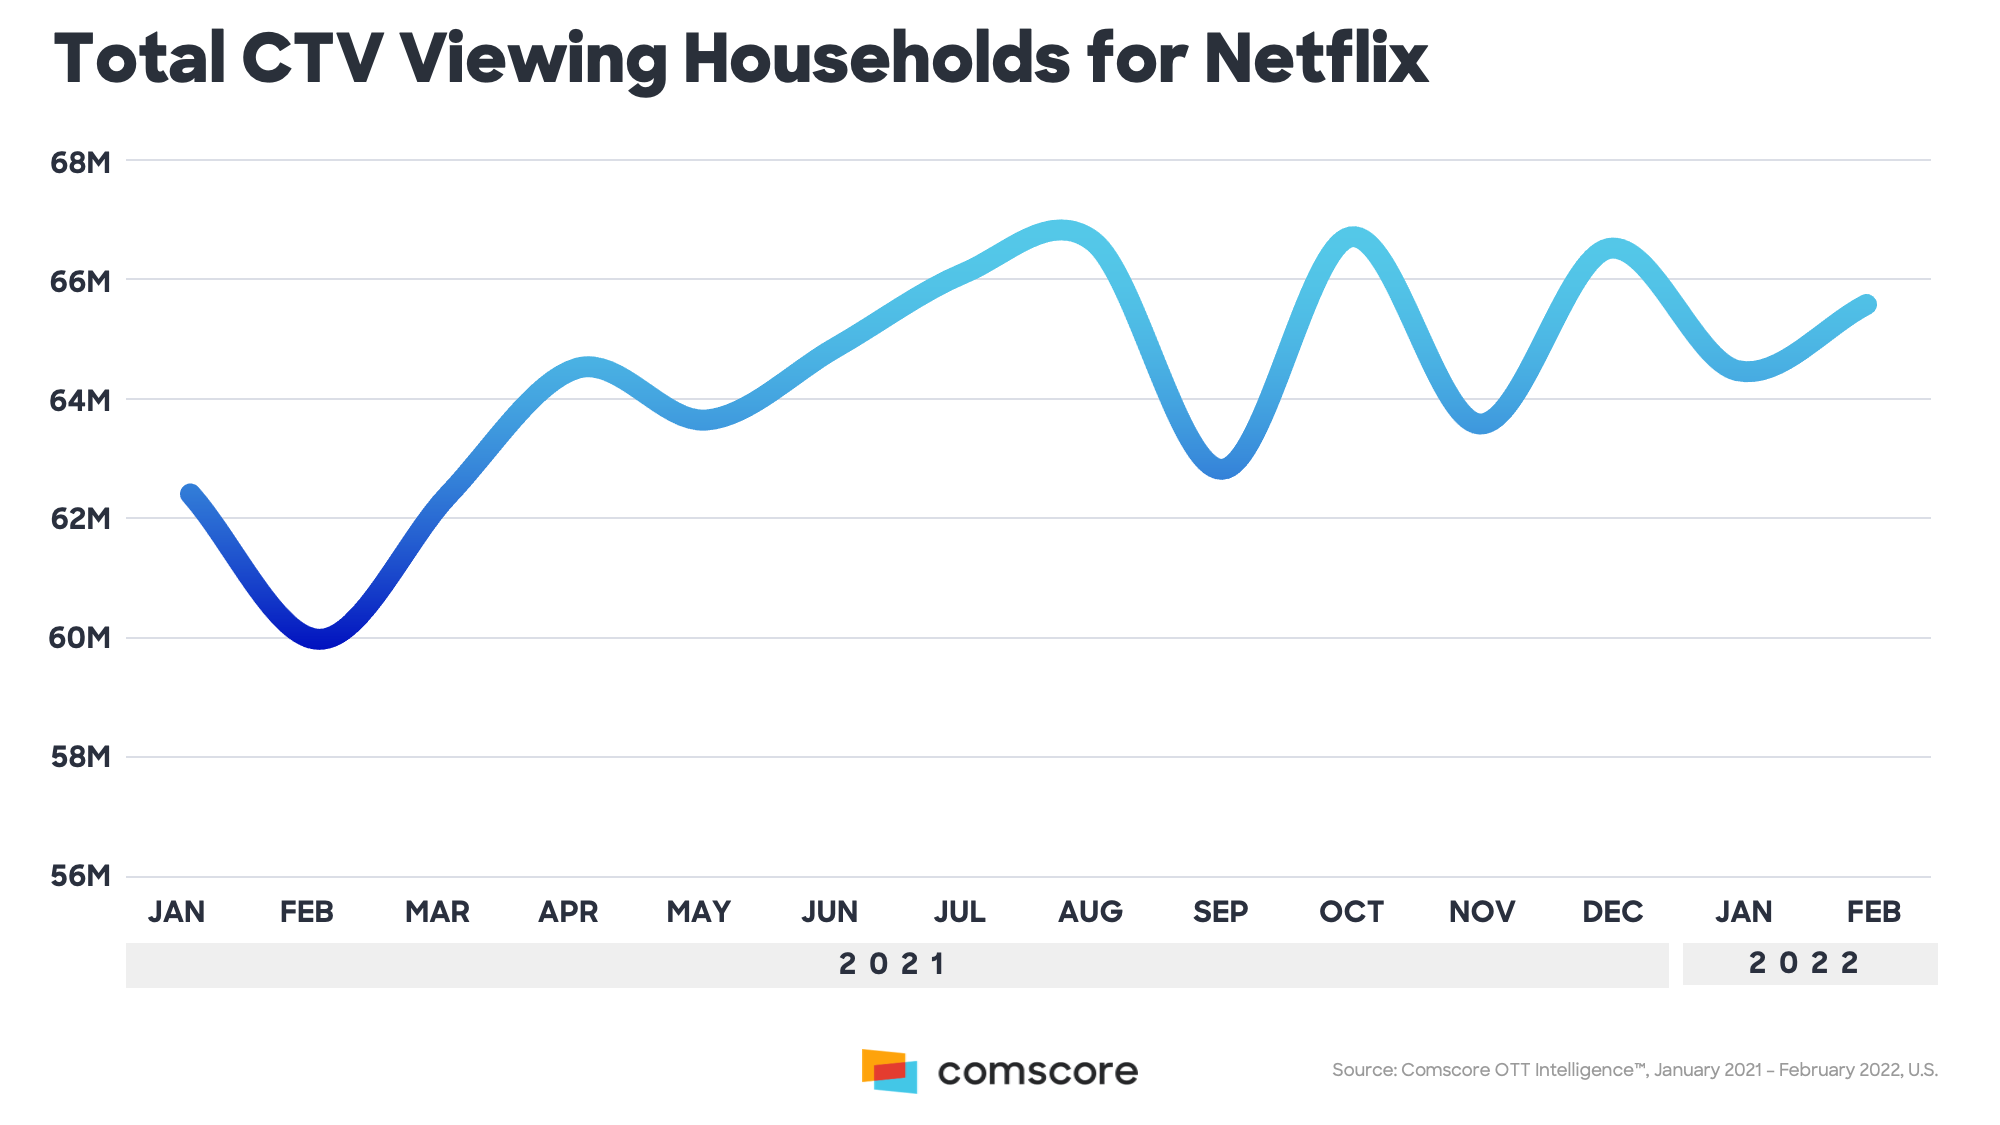 Total CTV Viewing Households for Netflix